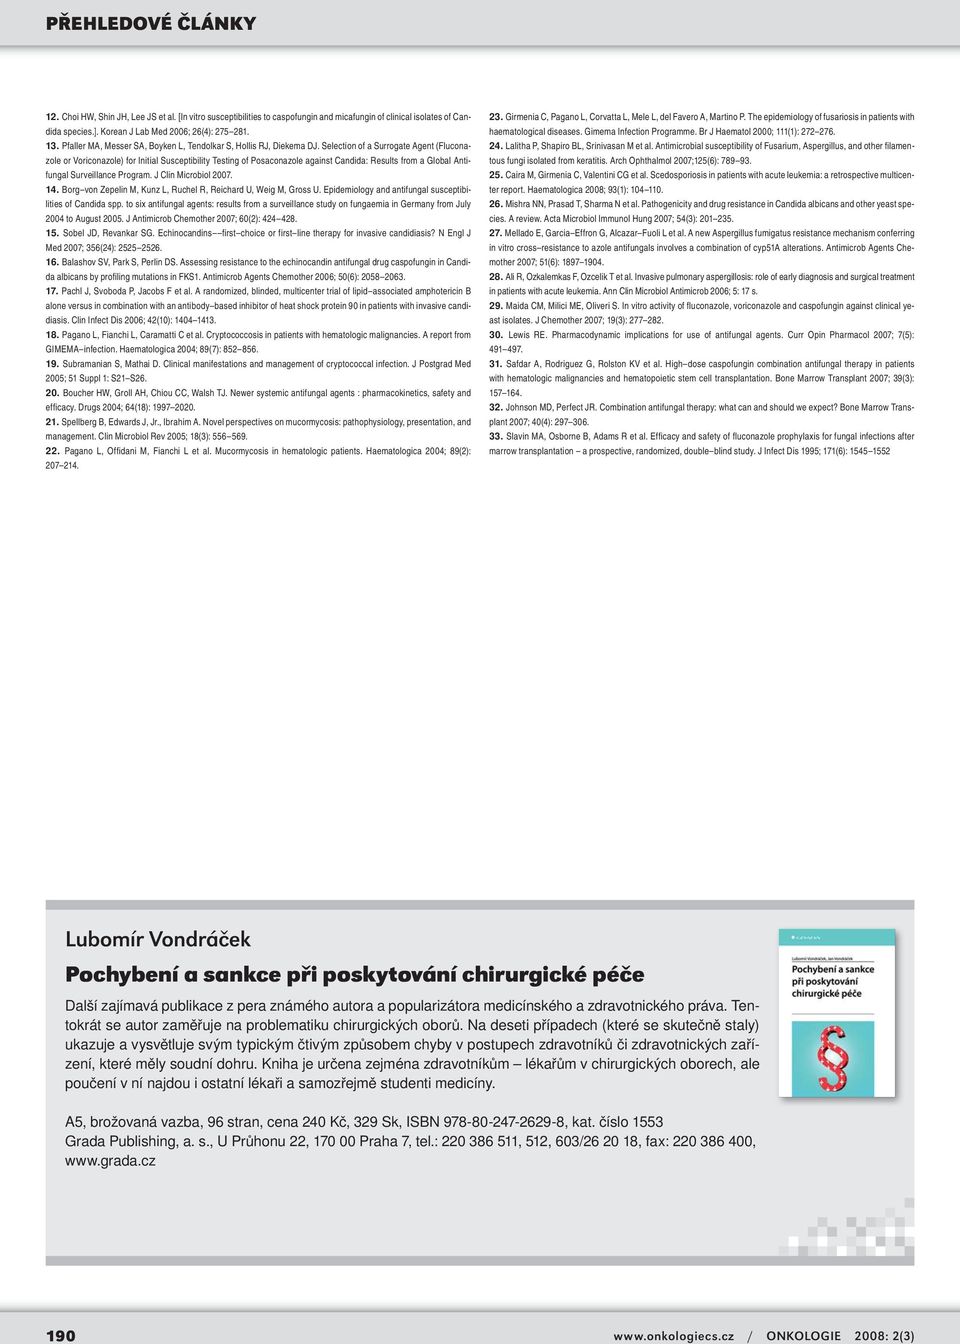 Selection of a Surrogate Agent (Fluconazole or Voriconazole) for Initial Susceptibility Testing of Posaconazole against Candida: Results from a Global Antifungal Surveillance Program.